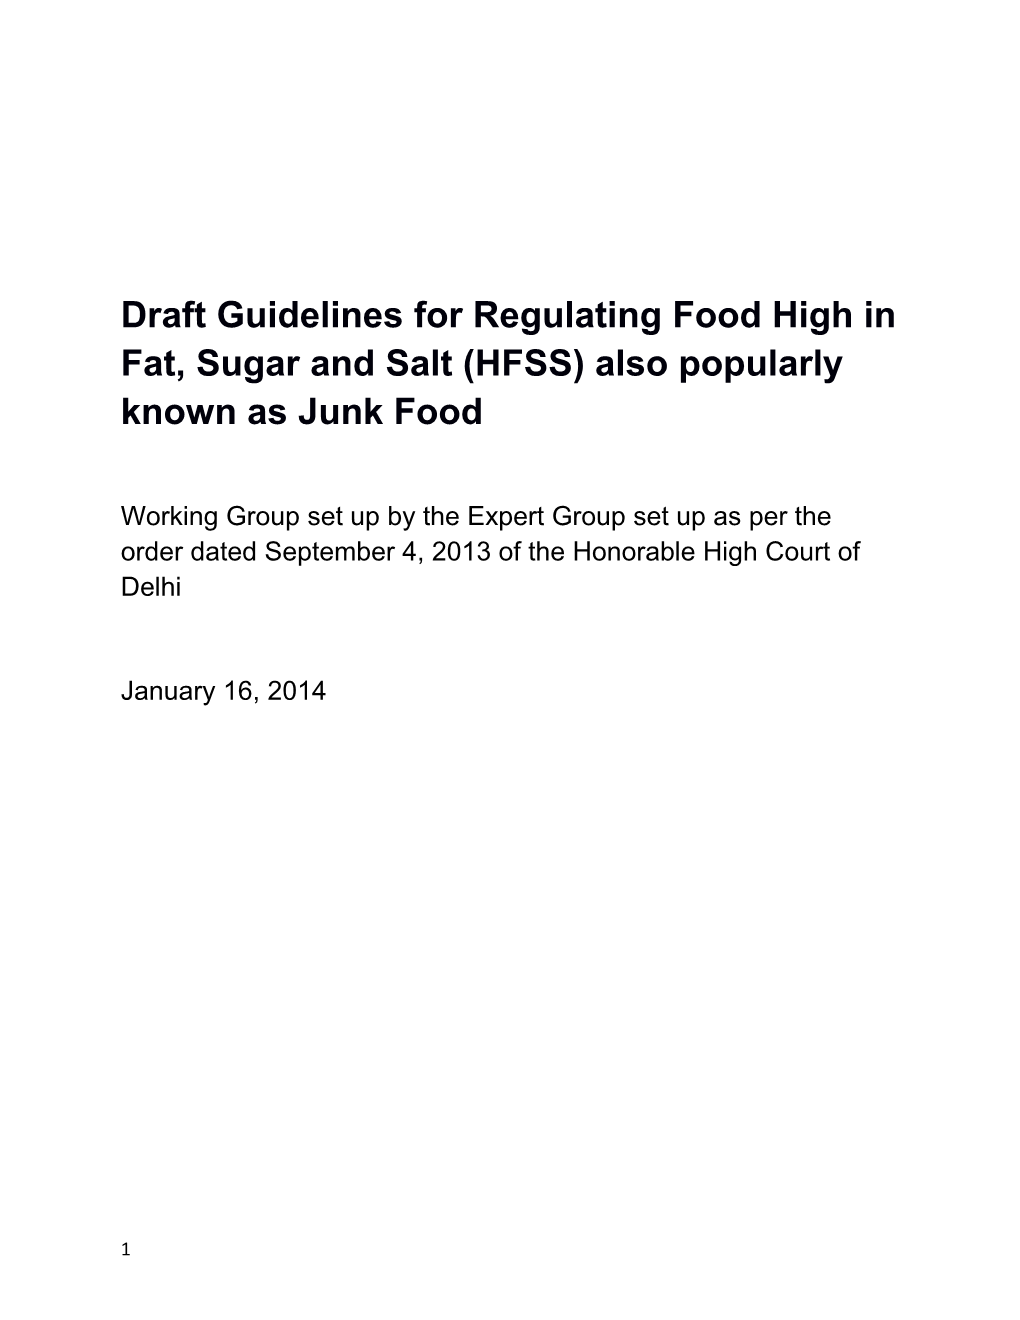 Draft Guidelines for Regulating Food High in Fat, Sugar and Salt (HFSS) Also Popularly